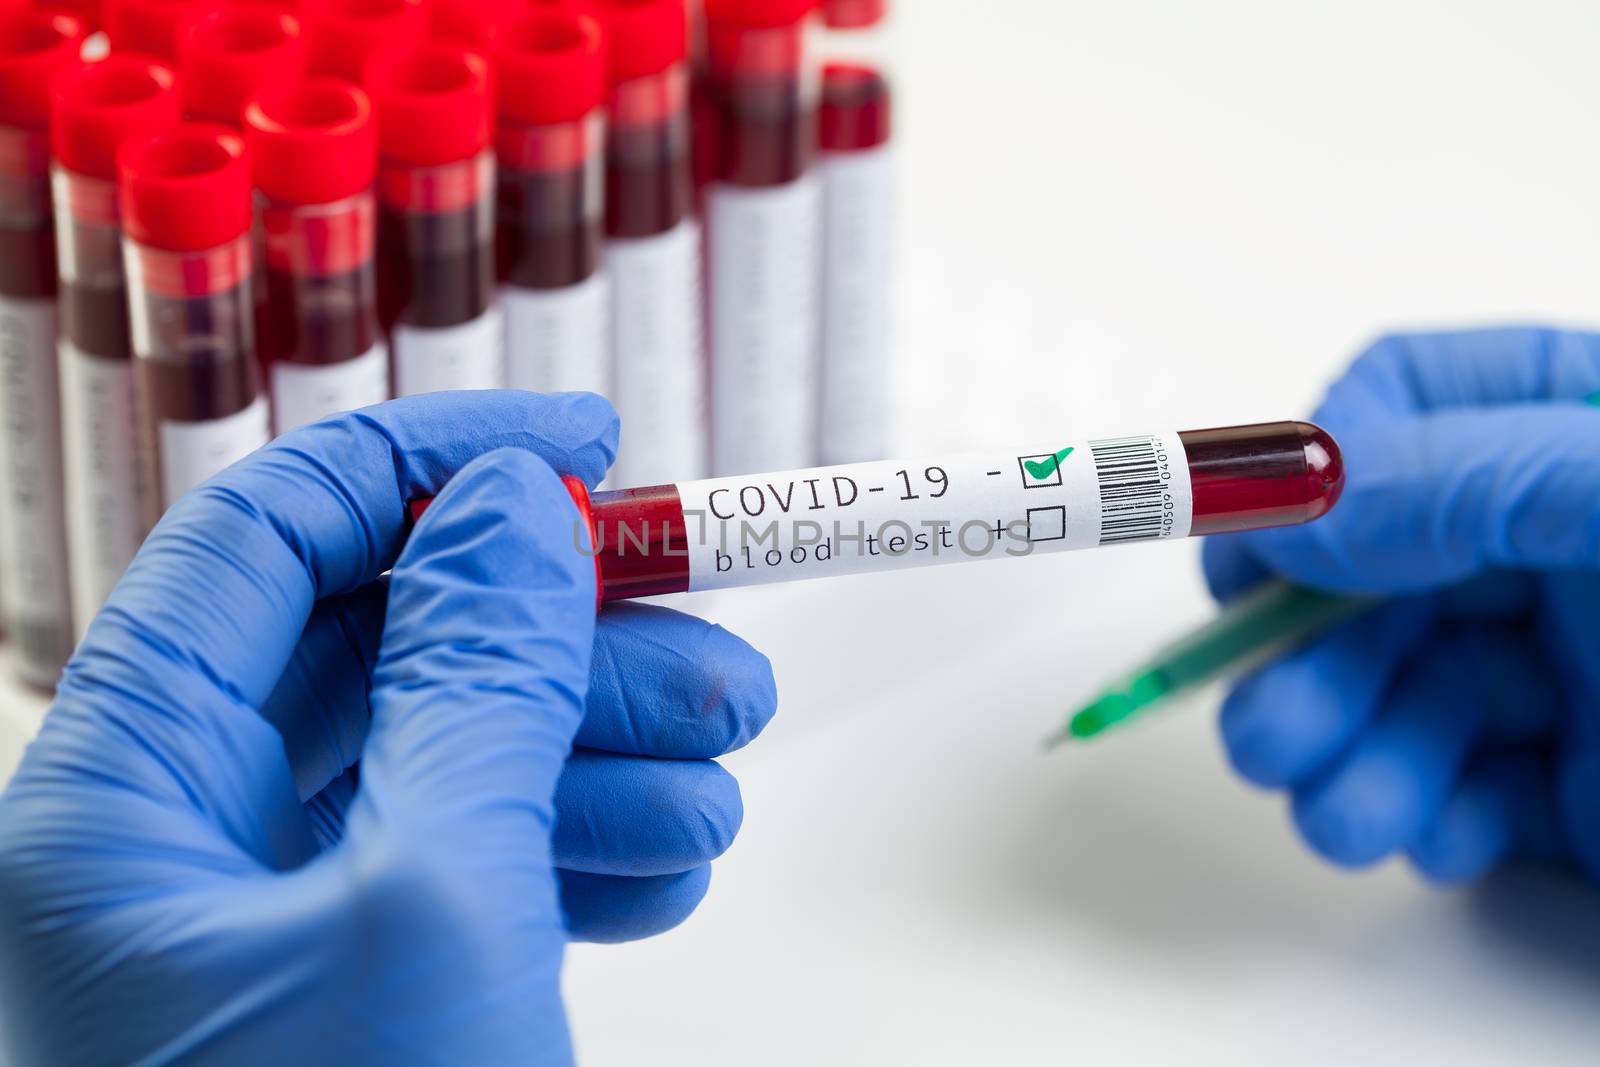 Doctor or lab scientist labelling a test tube with Coronavirus patient blood sample,NEGATIVE Covid-19 test results, deadly corona virus disease,global pandemic crisis,WHO hematology testing procedure